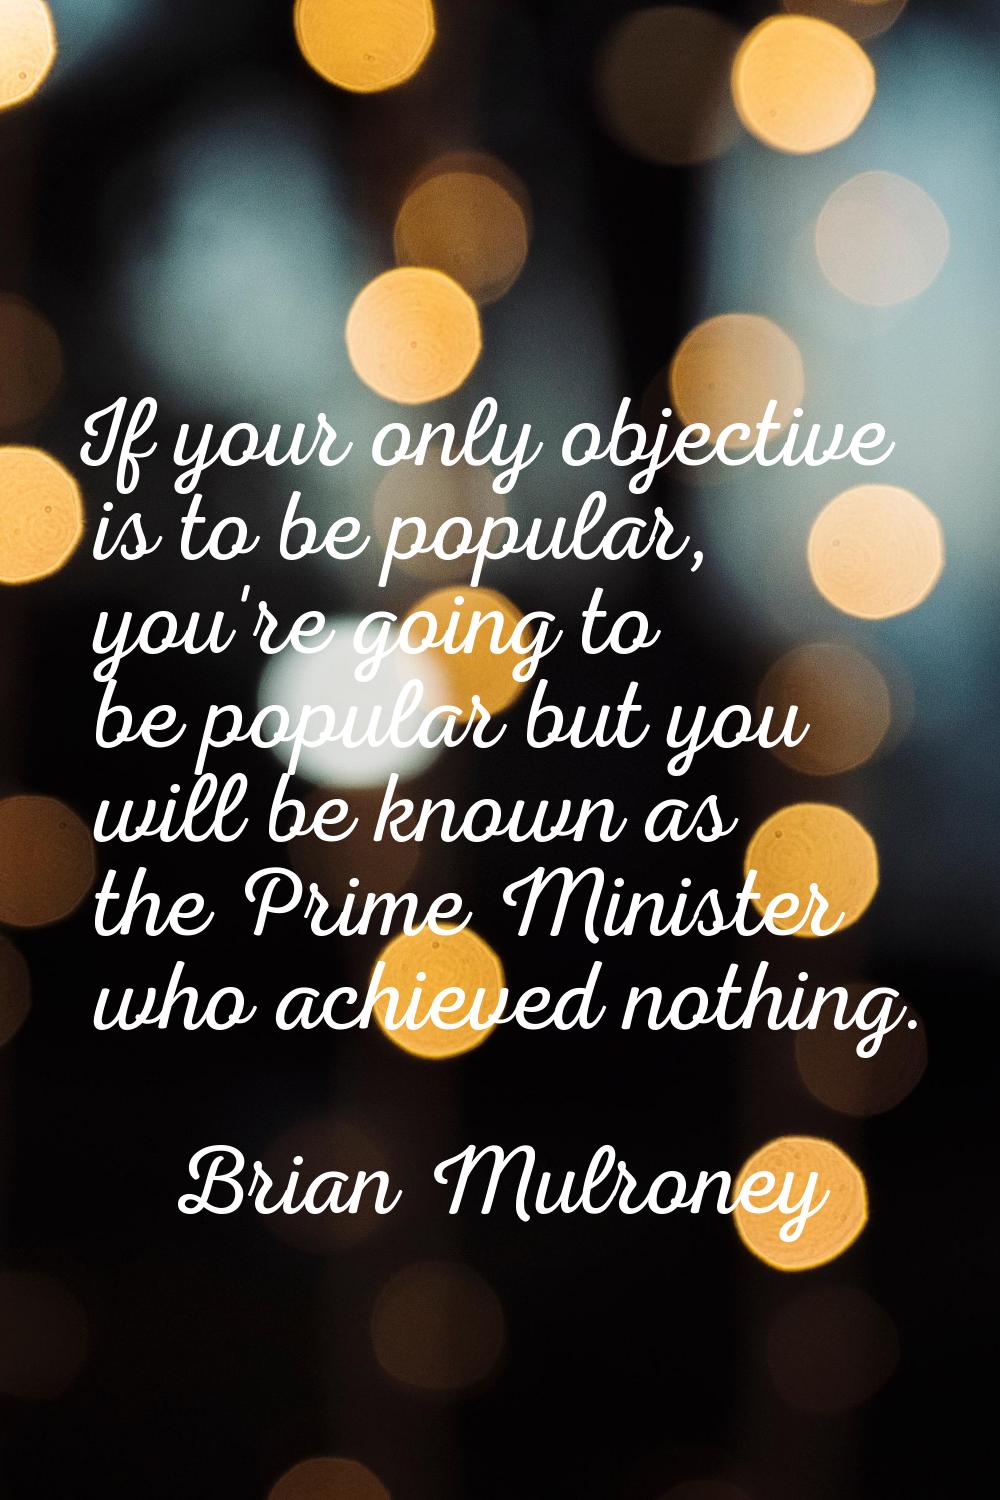 If your only objective is to be popular, you're going to be popular but you will be known as the Pr